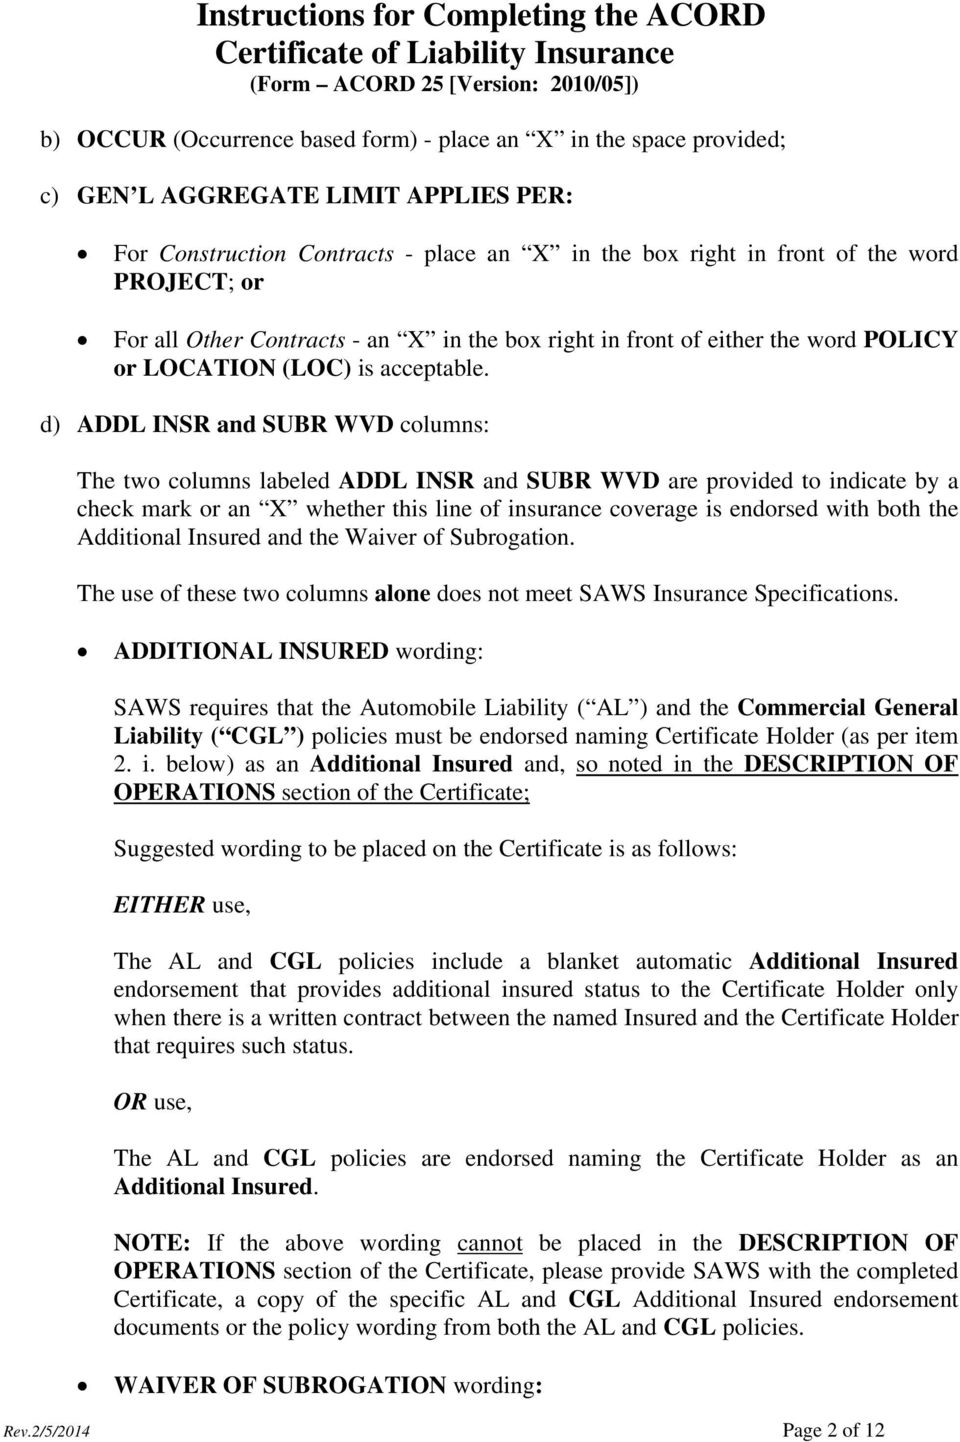 d) ADDL INSR and SUBR WVD columns: The two columns labeled ADDL INSR and SUBR WVD are provided to indicate by a check mark or an X whether this line of insurance coverage is endorsed with both the